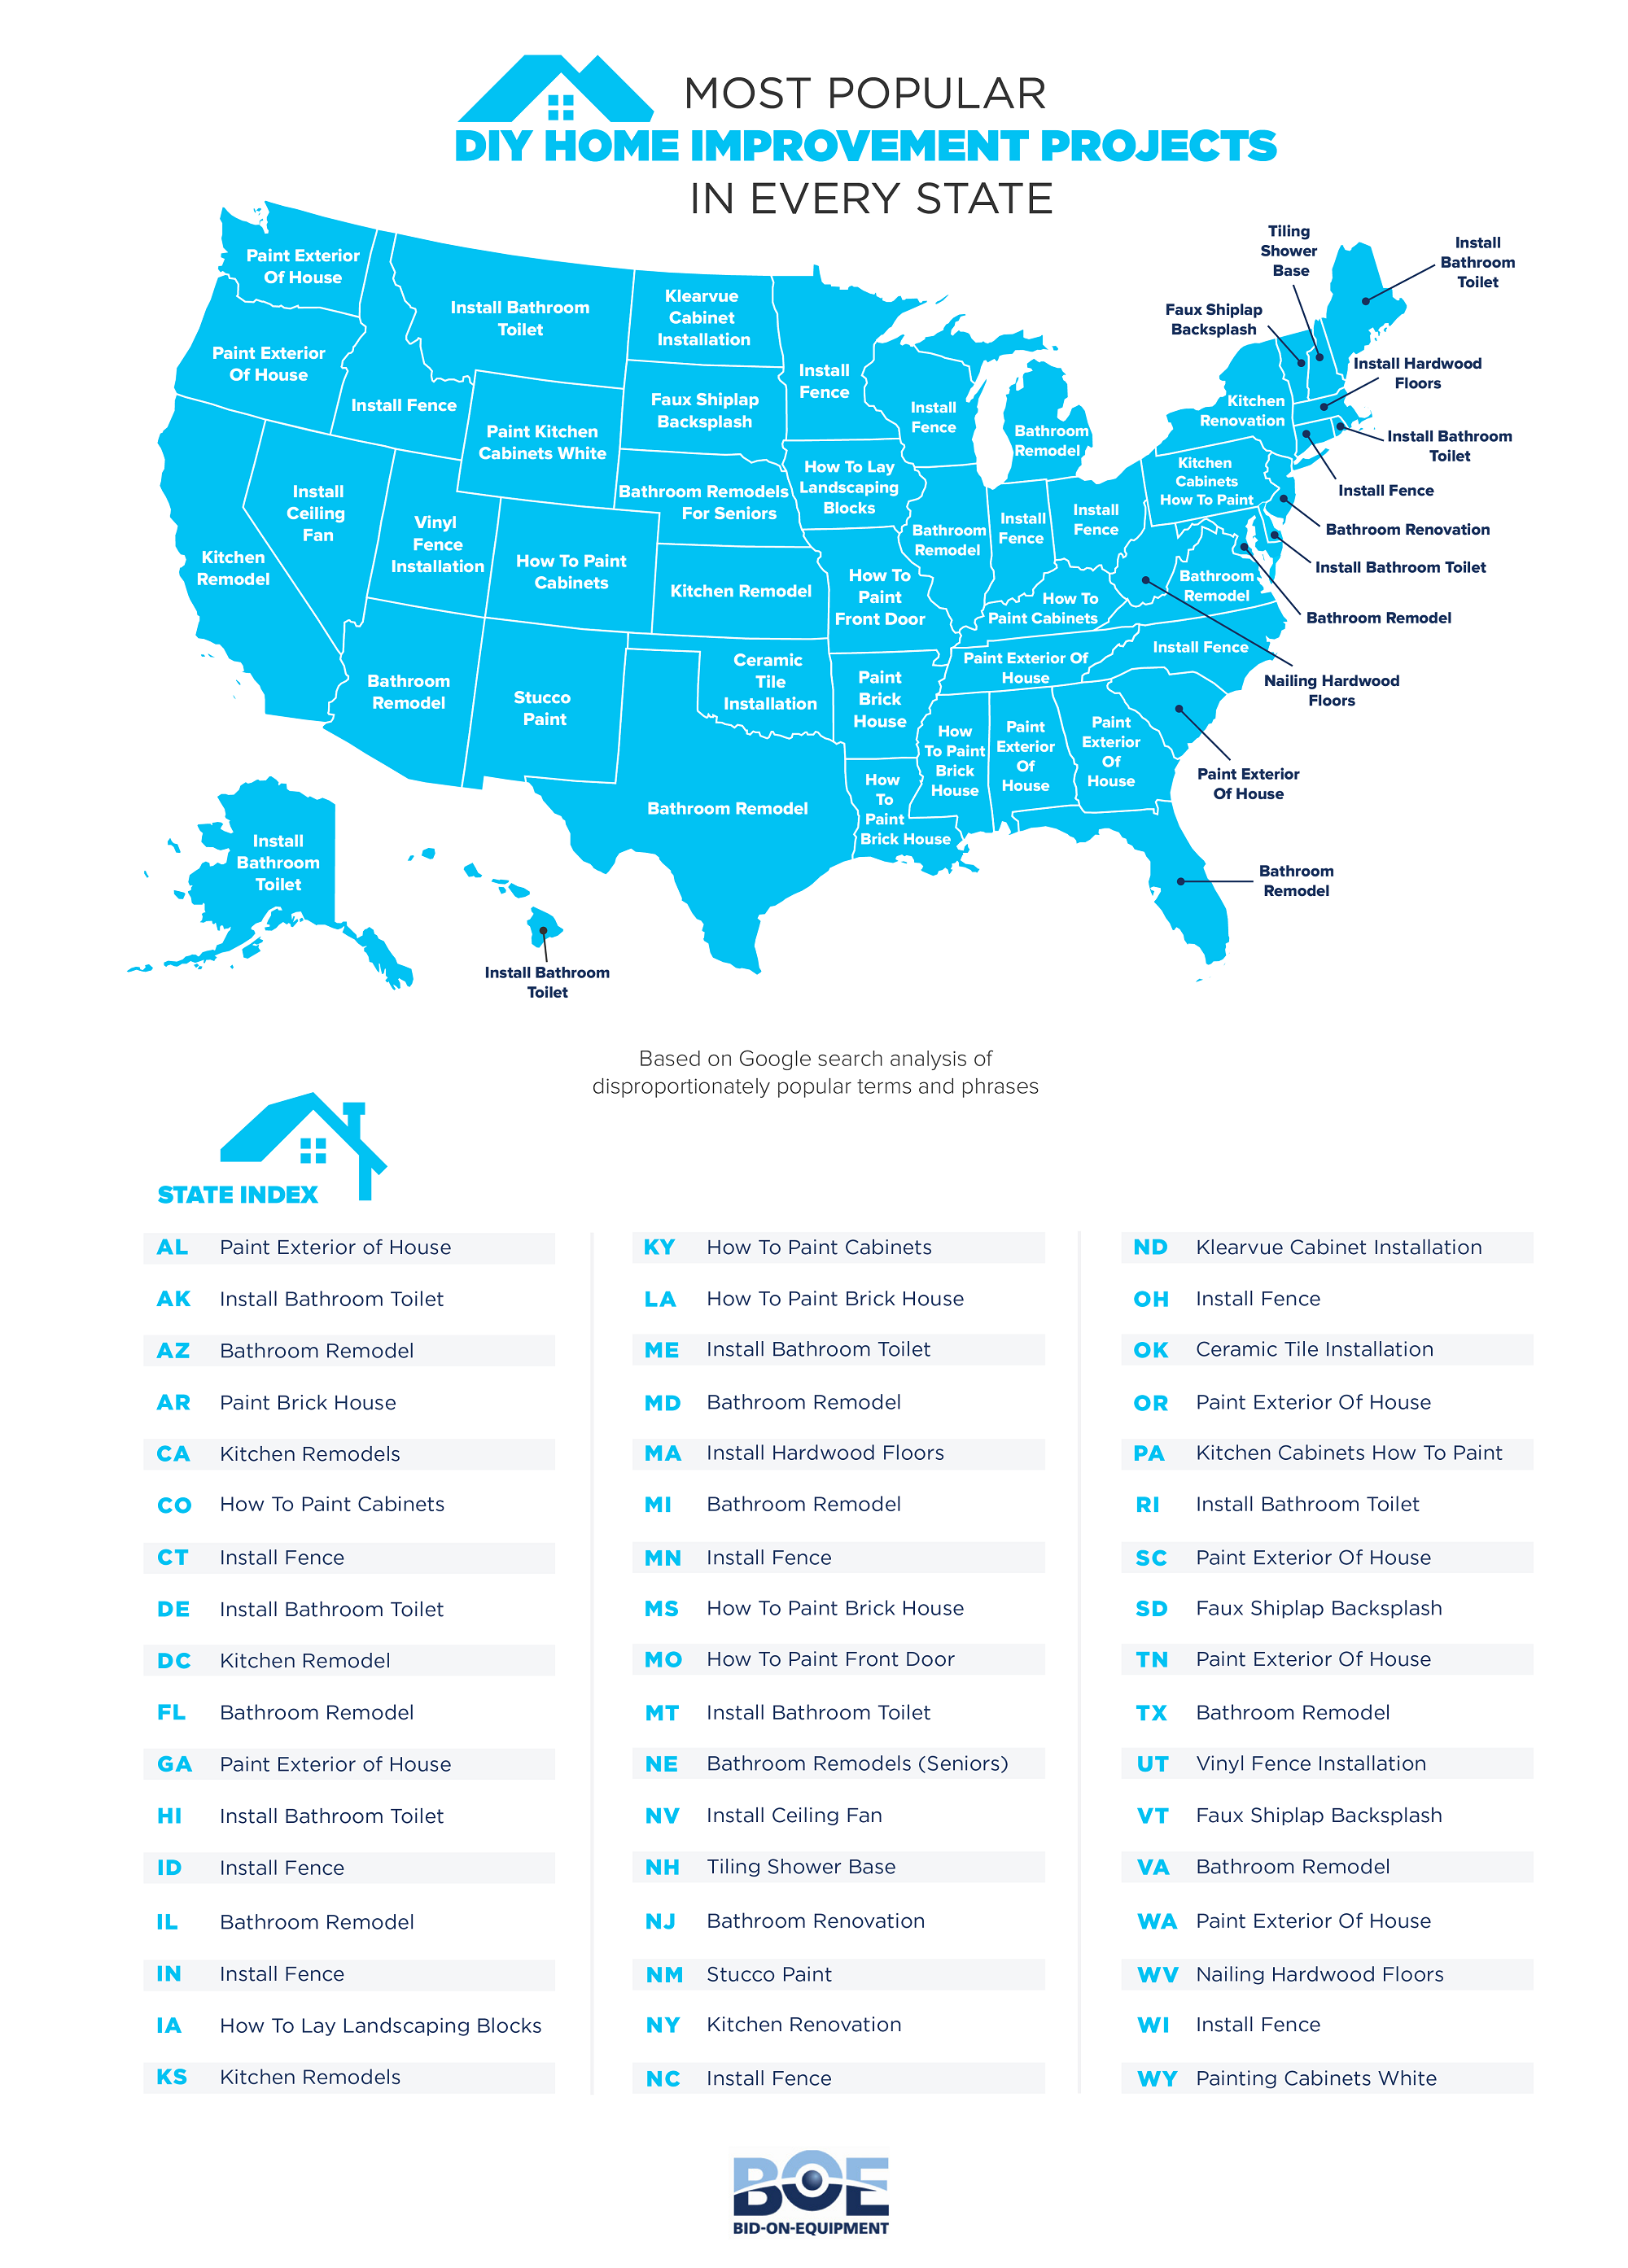 /Home Improvement by State